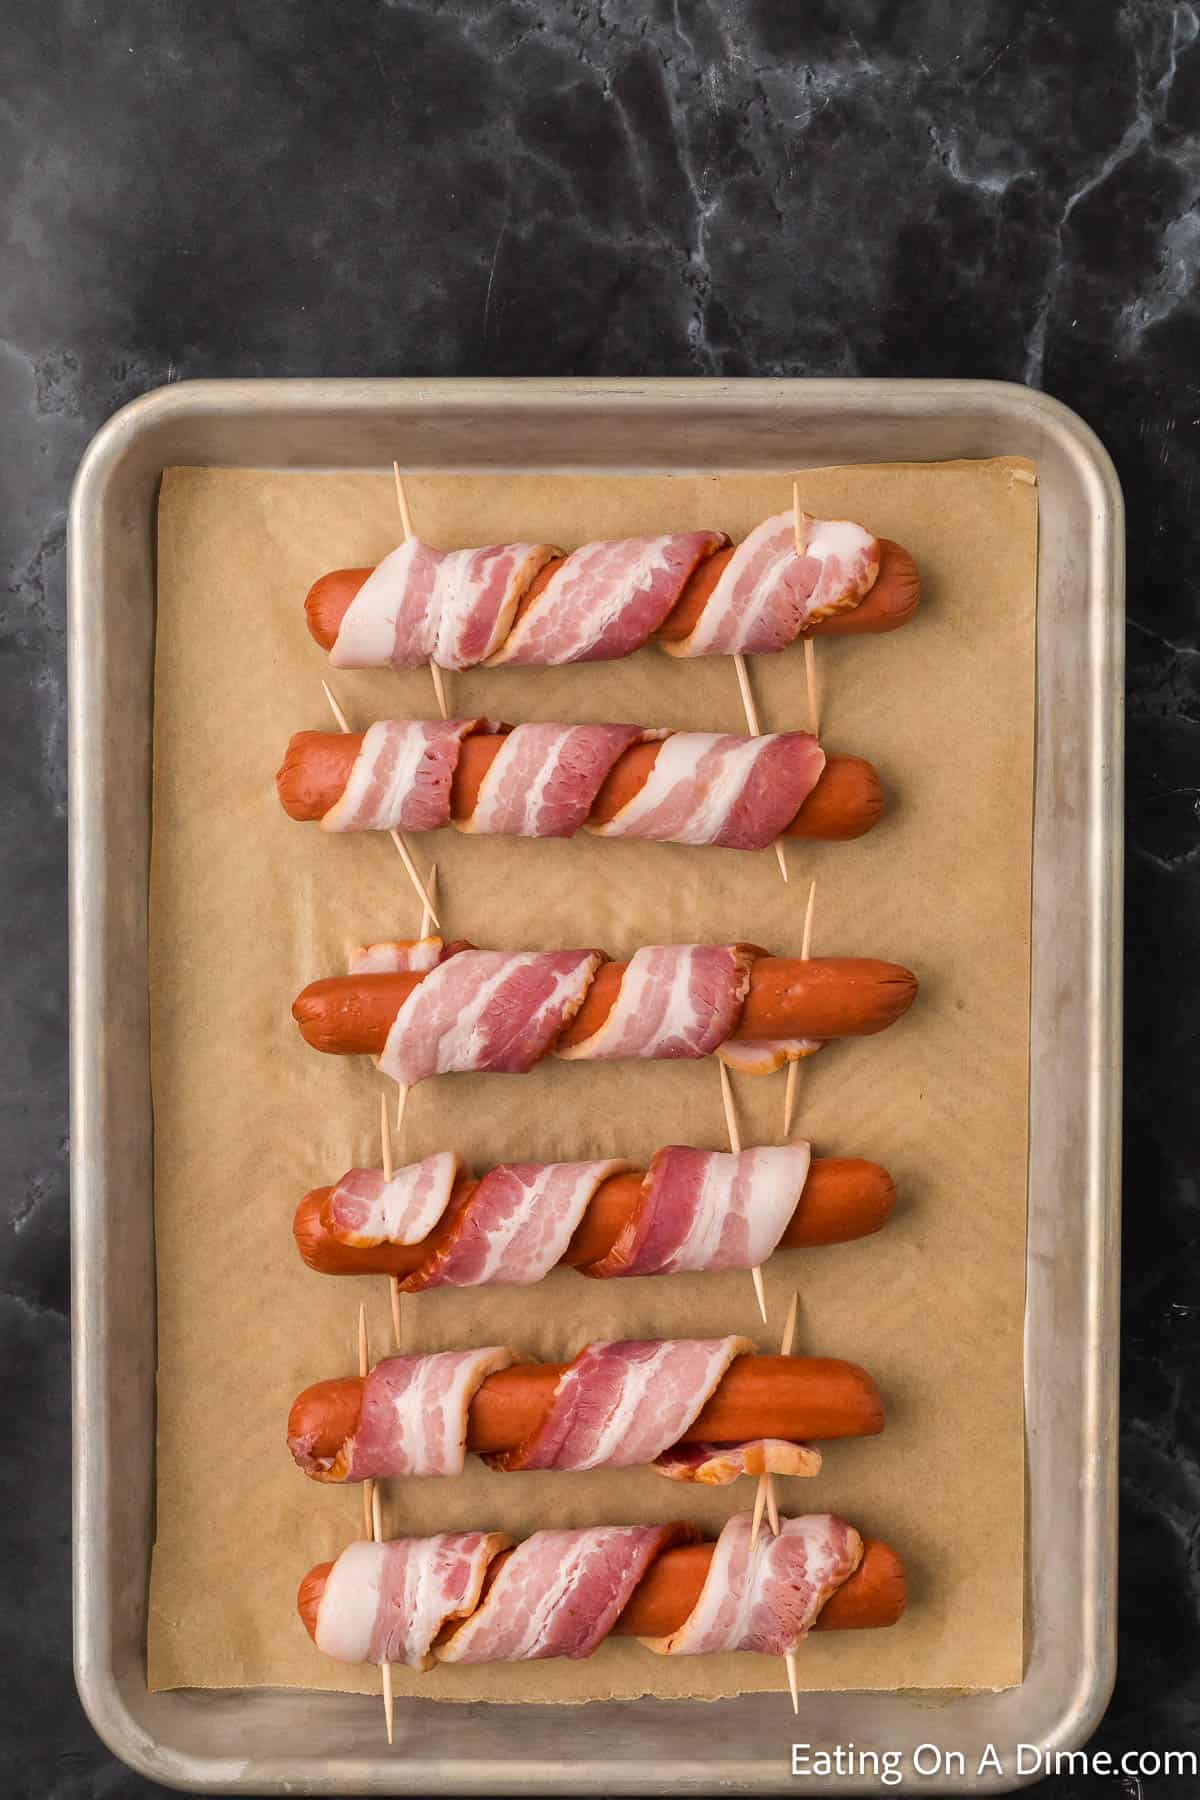 Placing the bacon wrapped hot dogs on a baking sheet lined with parchment paper